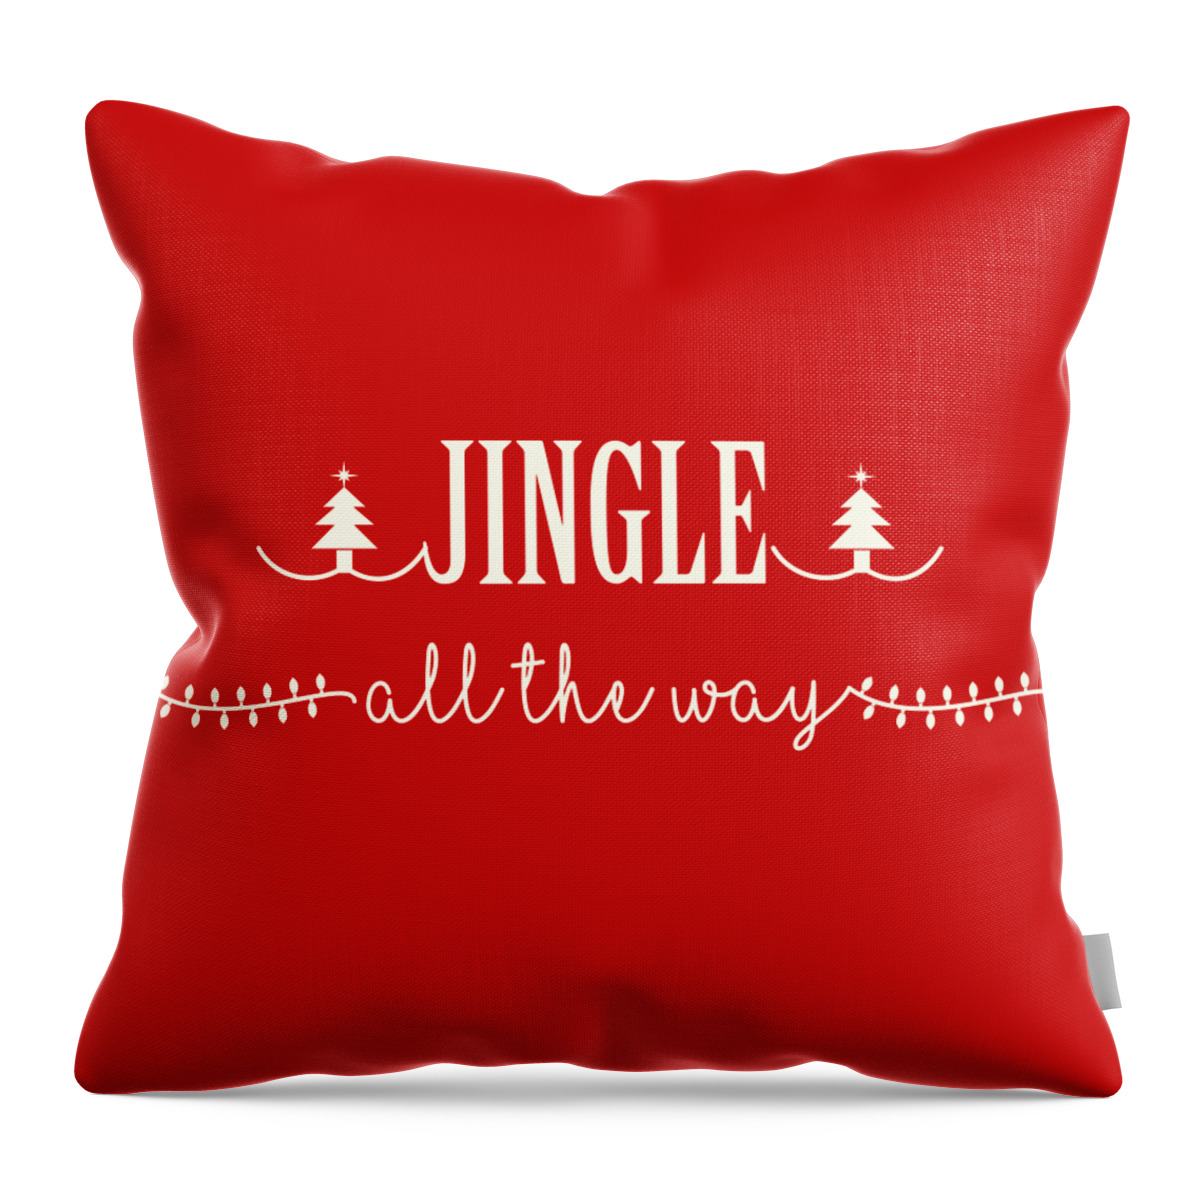 Jingle Throw Pillow featuring the digital art Jingle All The Way by Hermes Fine Art